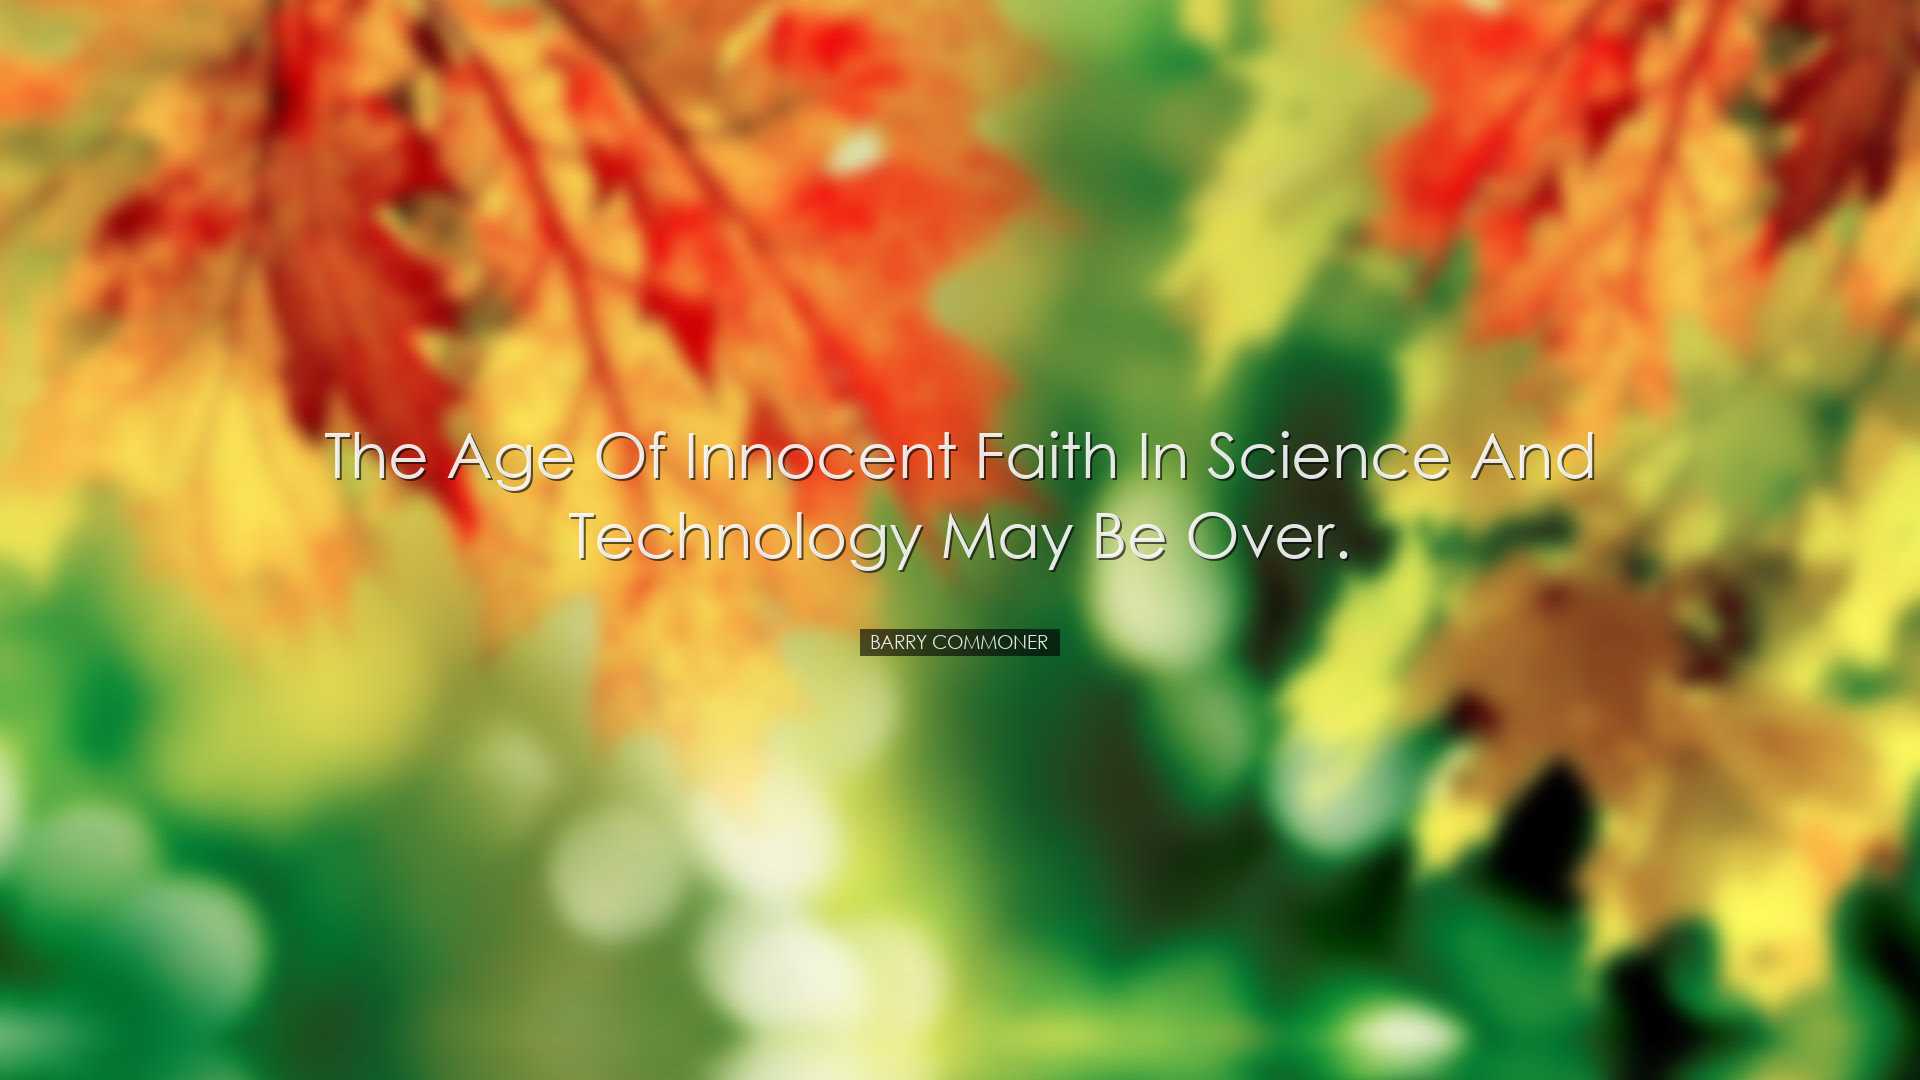 The age of innocent faith in science and technology may be over. -